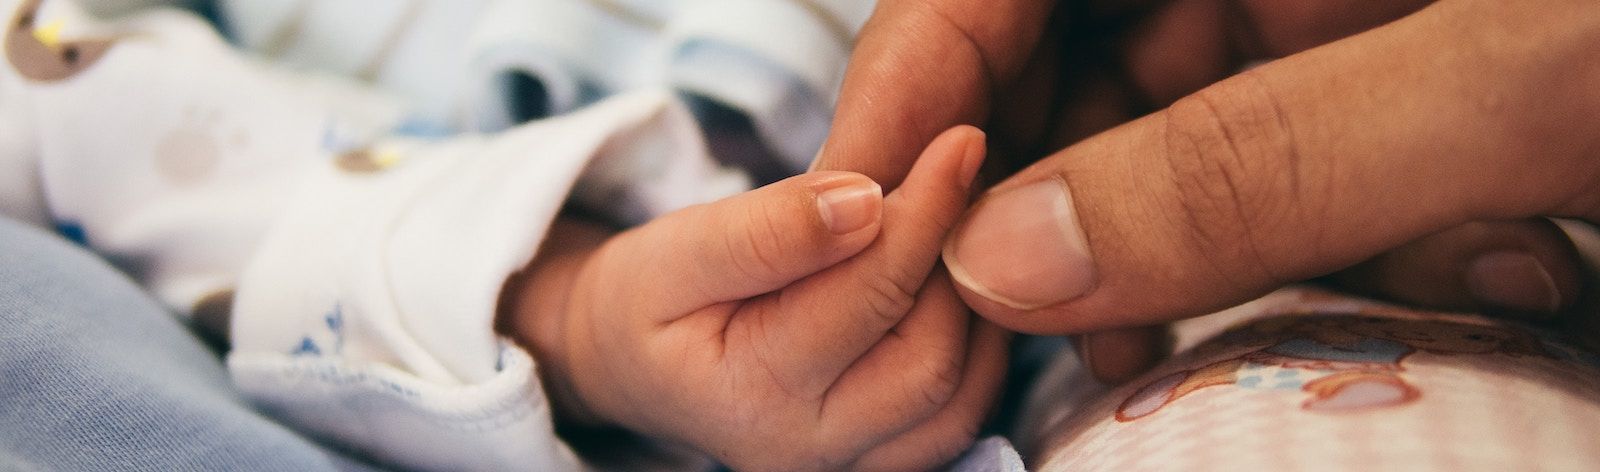 Closeup photo of a mother holding her baby's tiny hand between her index finger and thumb. The baby's arm is in a white sleeve with small animals on it and enters the photo from the left. The mother's hand enters the photo from the right.